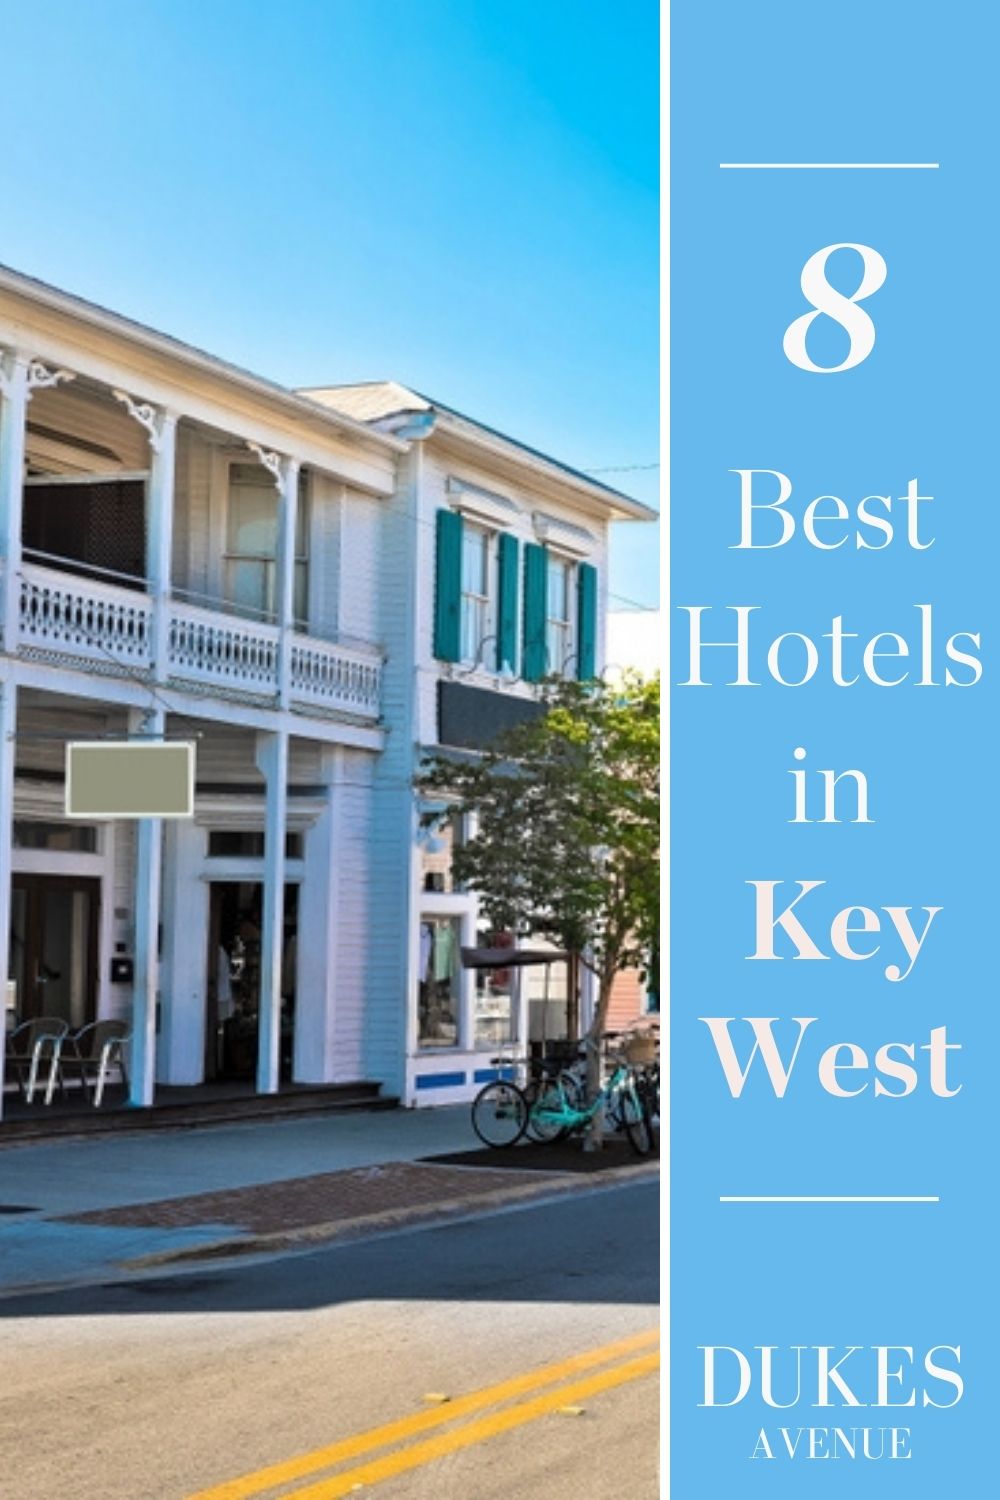 Image of resort in Key West with text overlay '8 Best Hotels in Key West' 